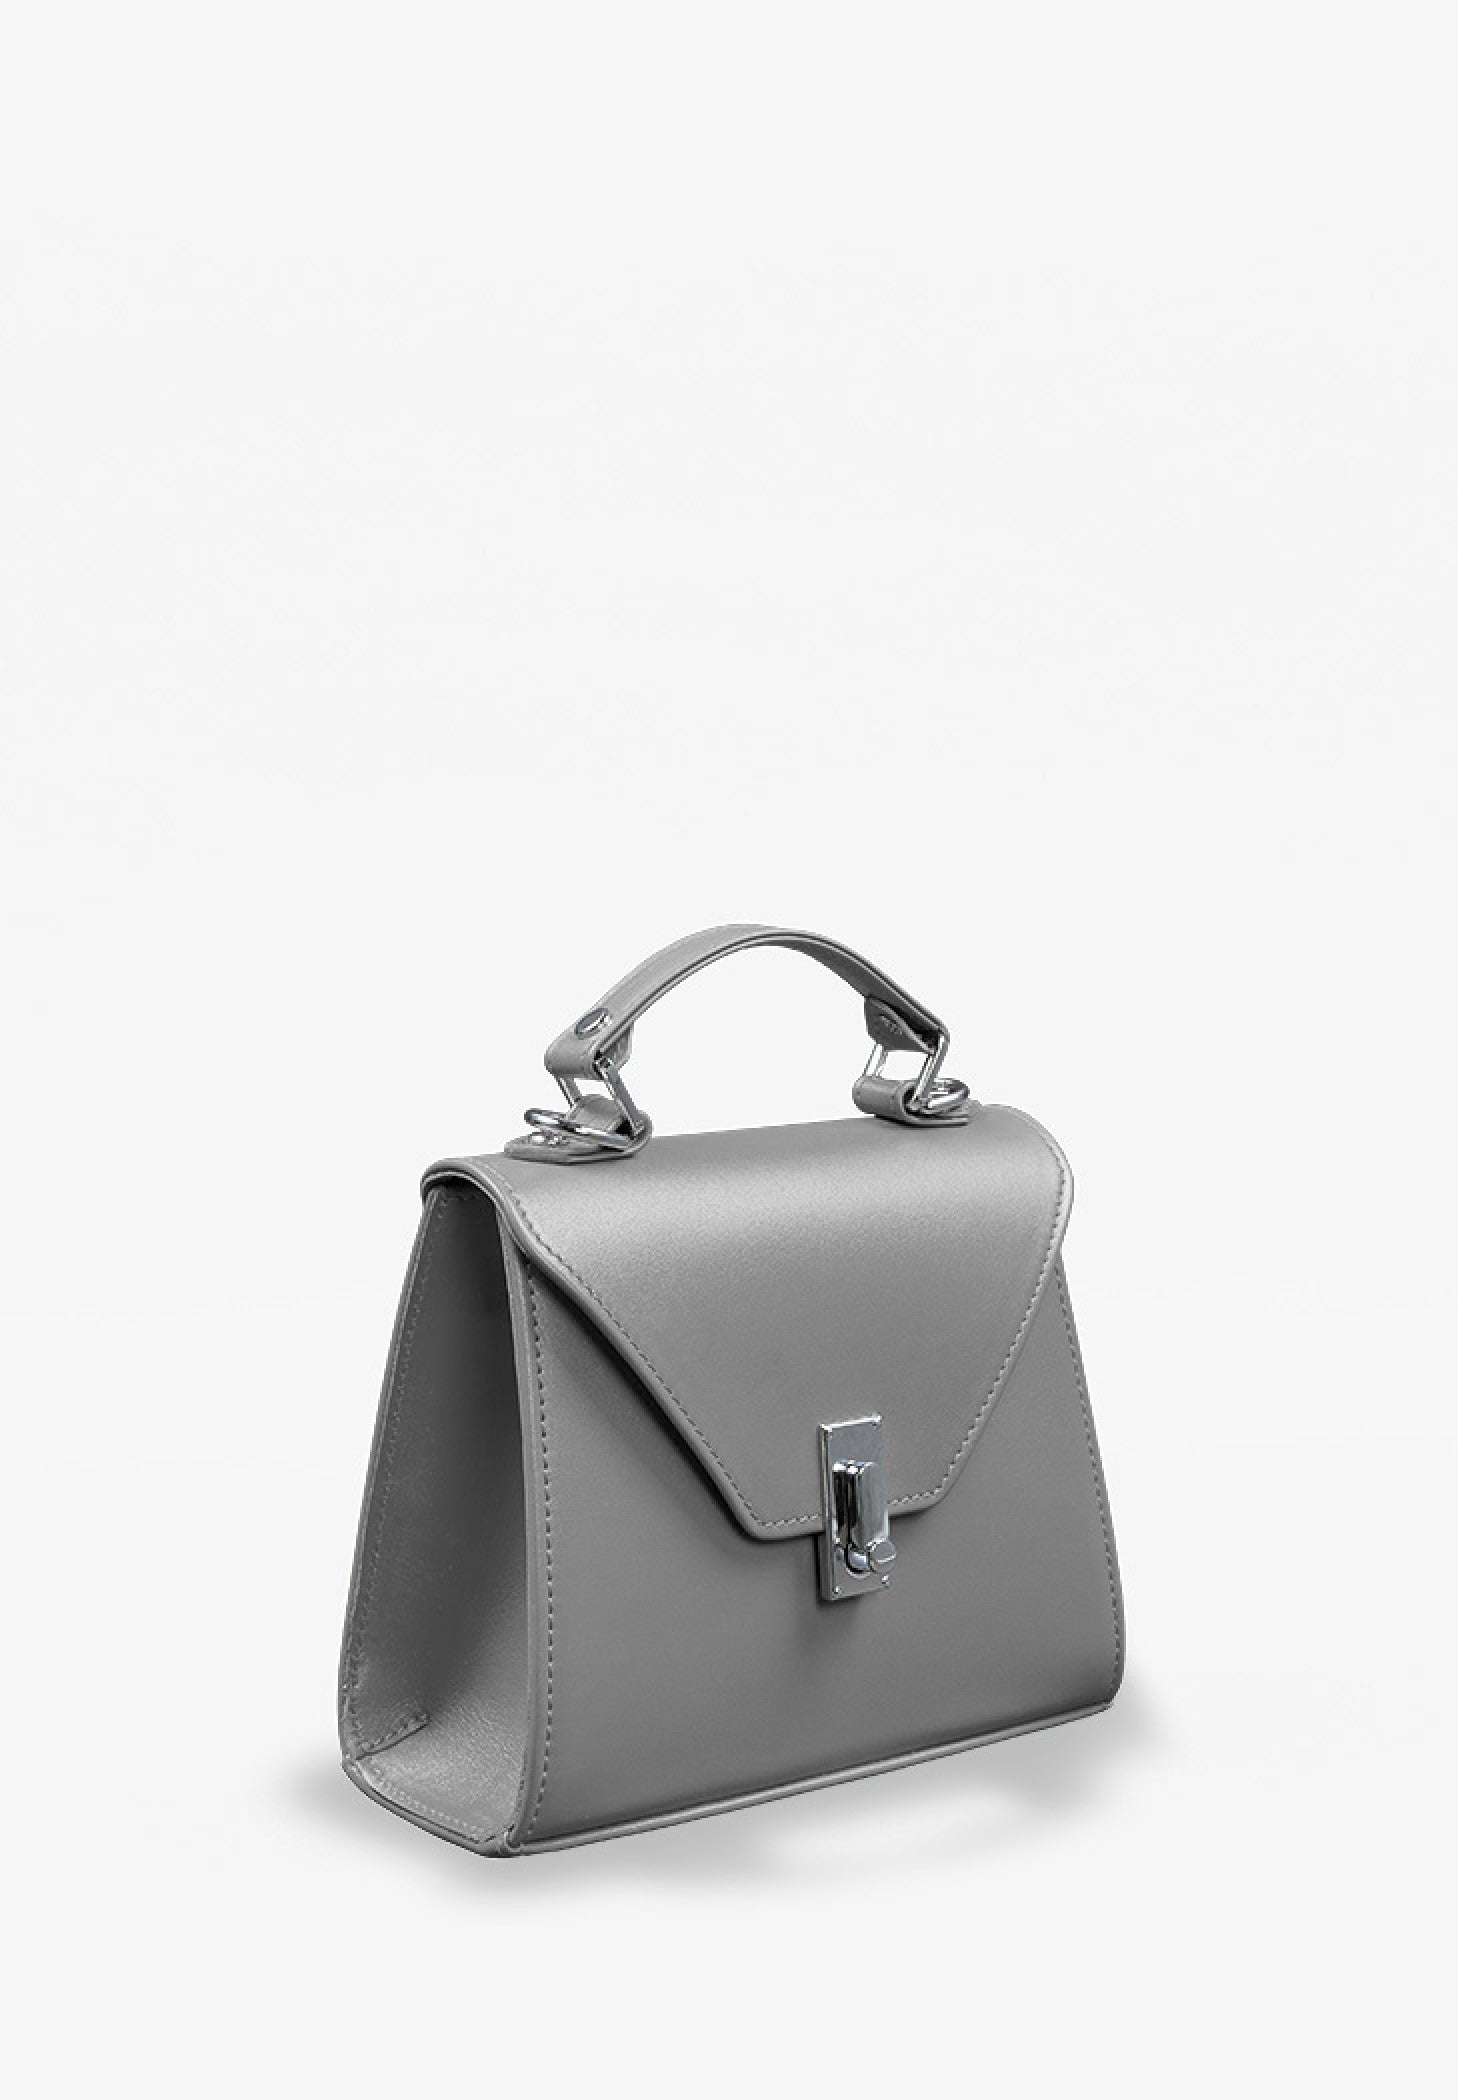 leather bag for women in grey color on a white background